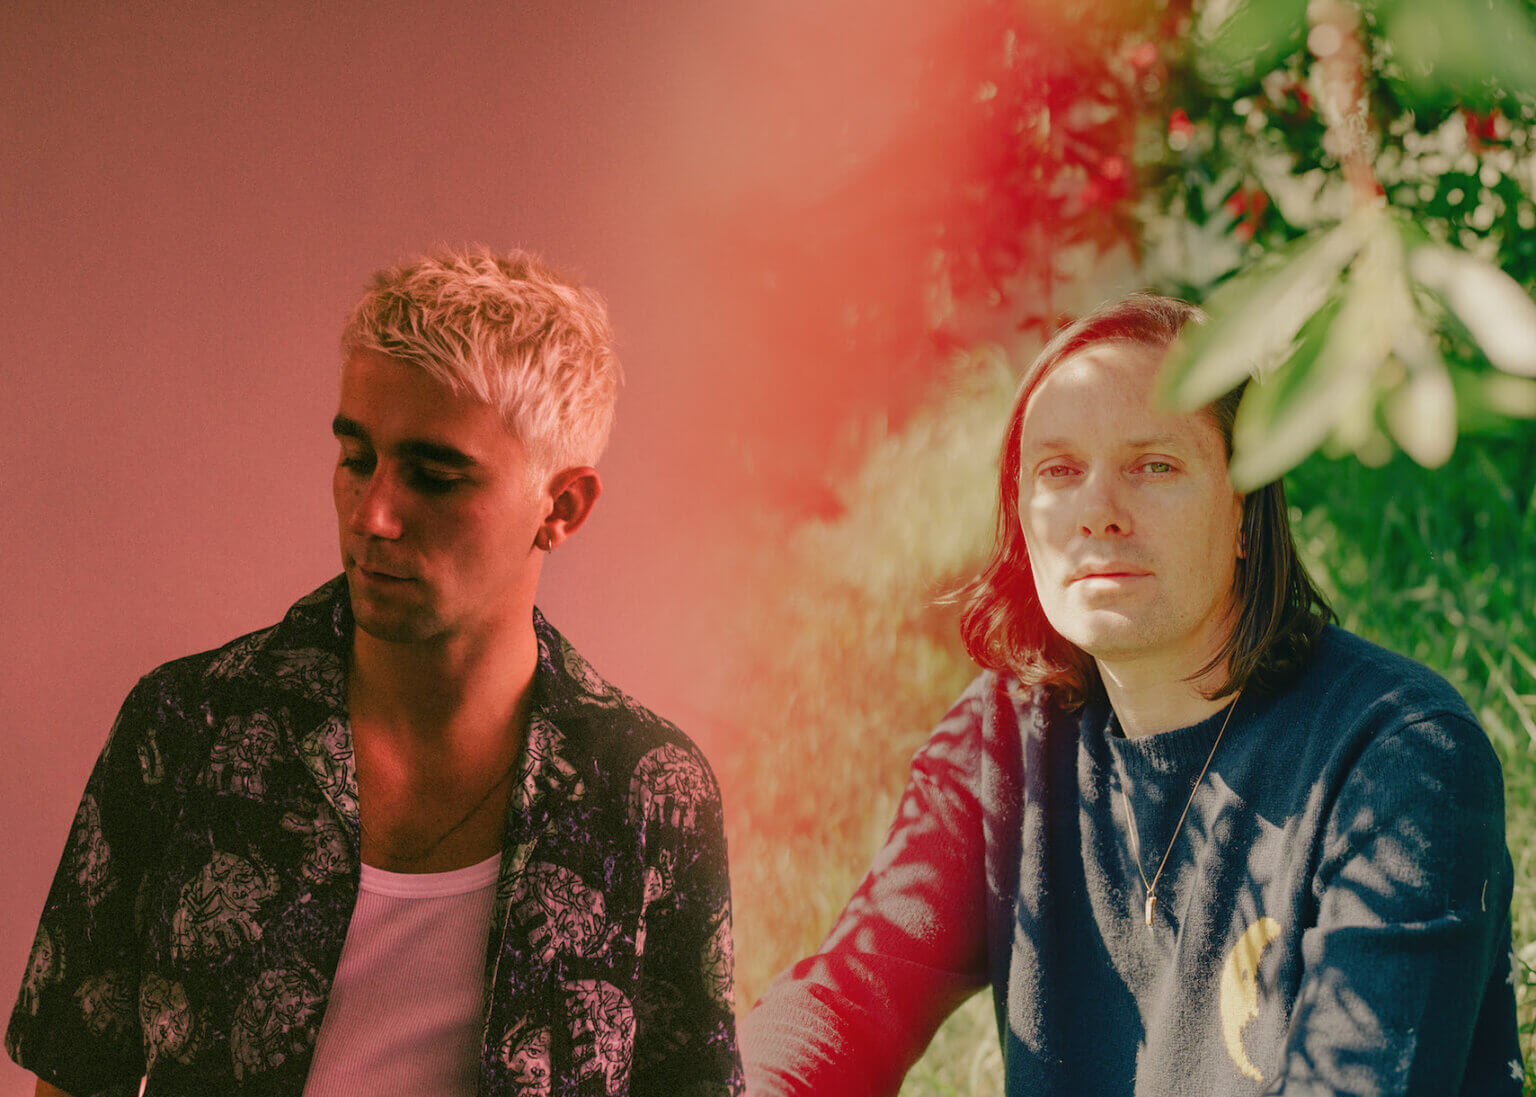 SG Lewis and Rhye collaboraye on new single "Time." The track is off SG Lewis' forthcoming release times, available February 19th via Republic